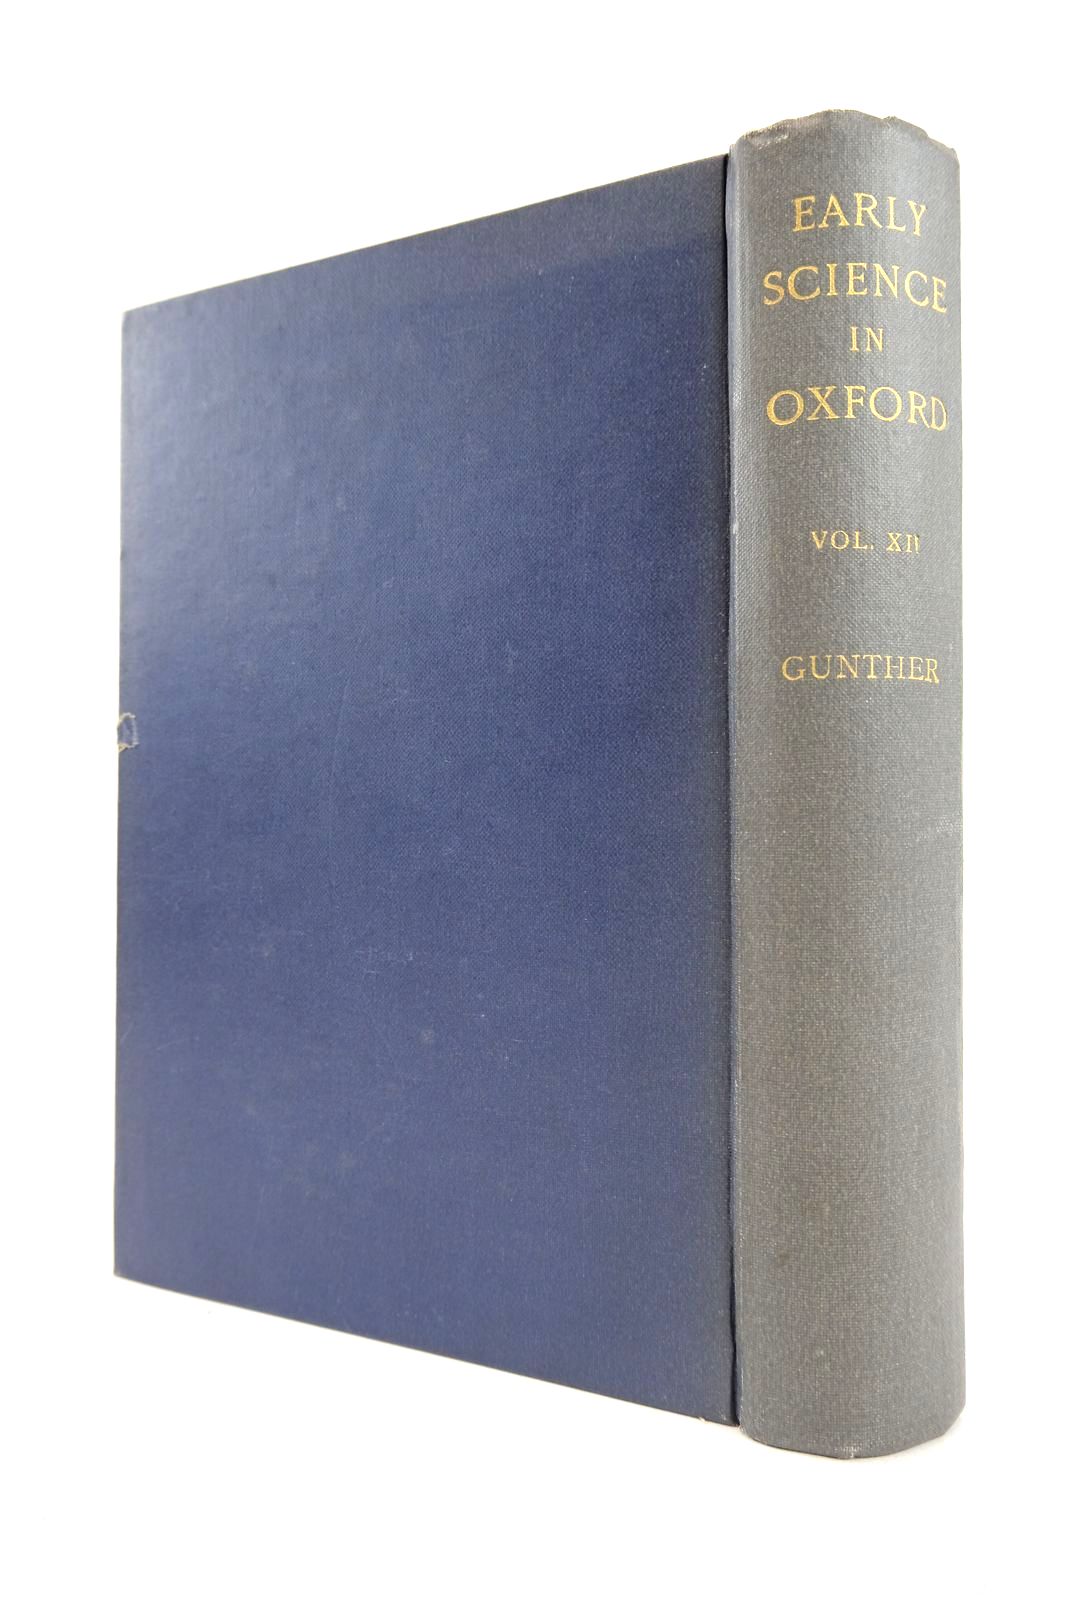 Photo of EARLY SCIENCE IN OXFORD VOL XII written by Gunther, R.T. published by Oxford University Press (STOCK CODE: 2133146)  for sale by Stella & Rose's Books